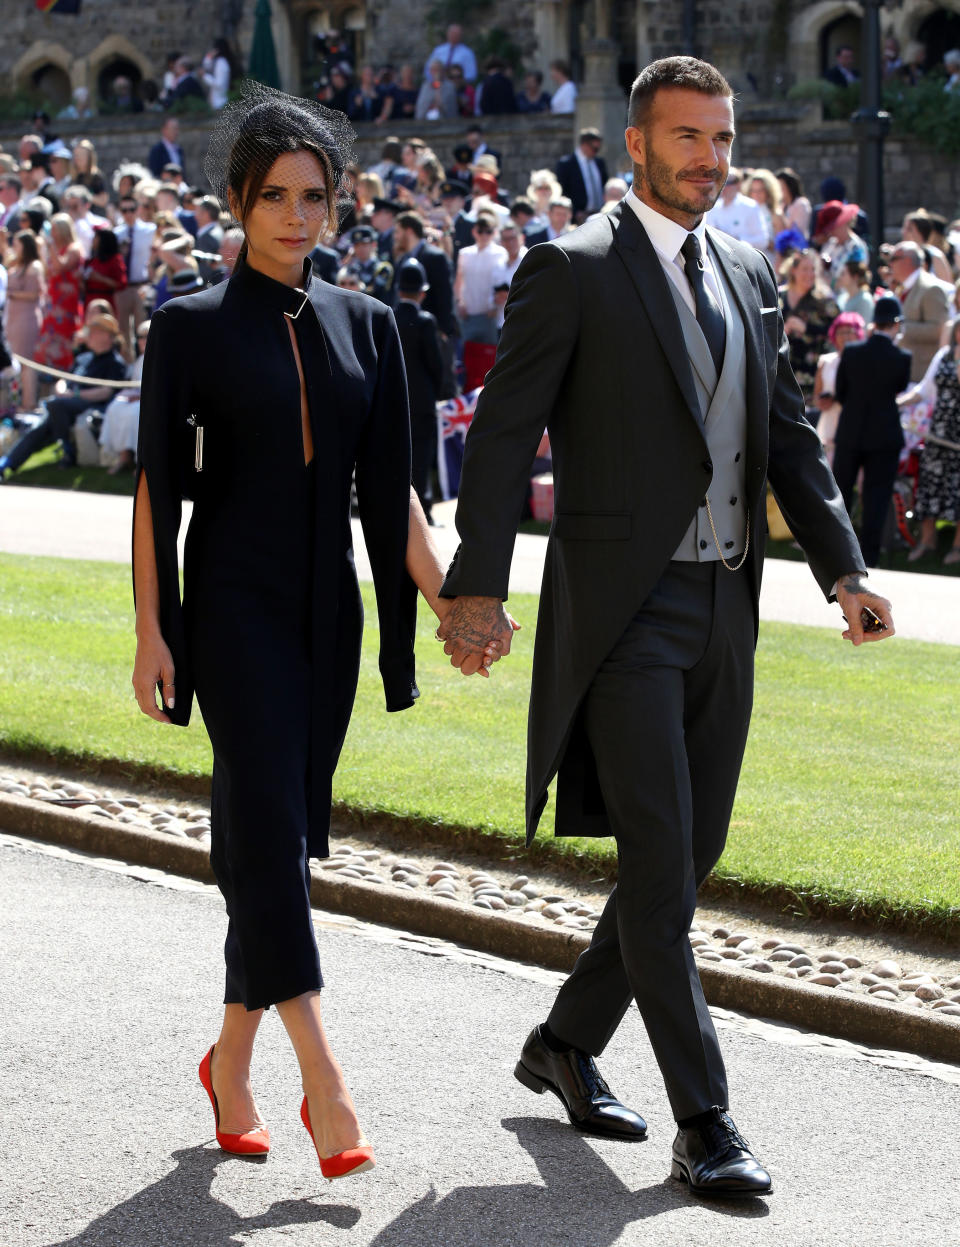 Victoria Beckham and David Beckham hold hands at Meghan Markle and Prince Harry's wedding in 2018